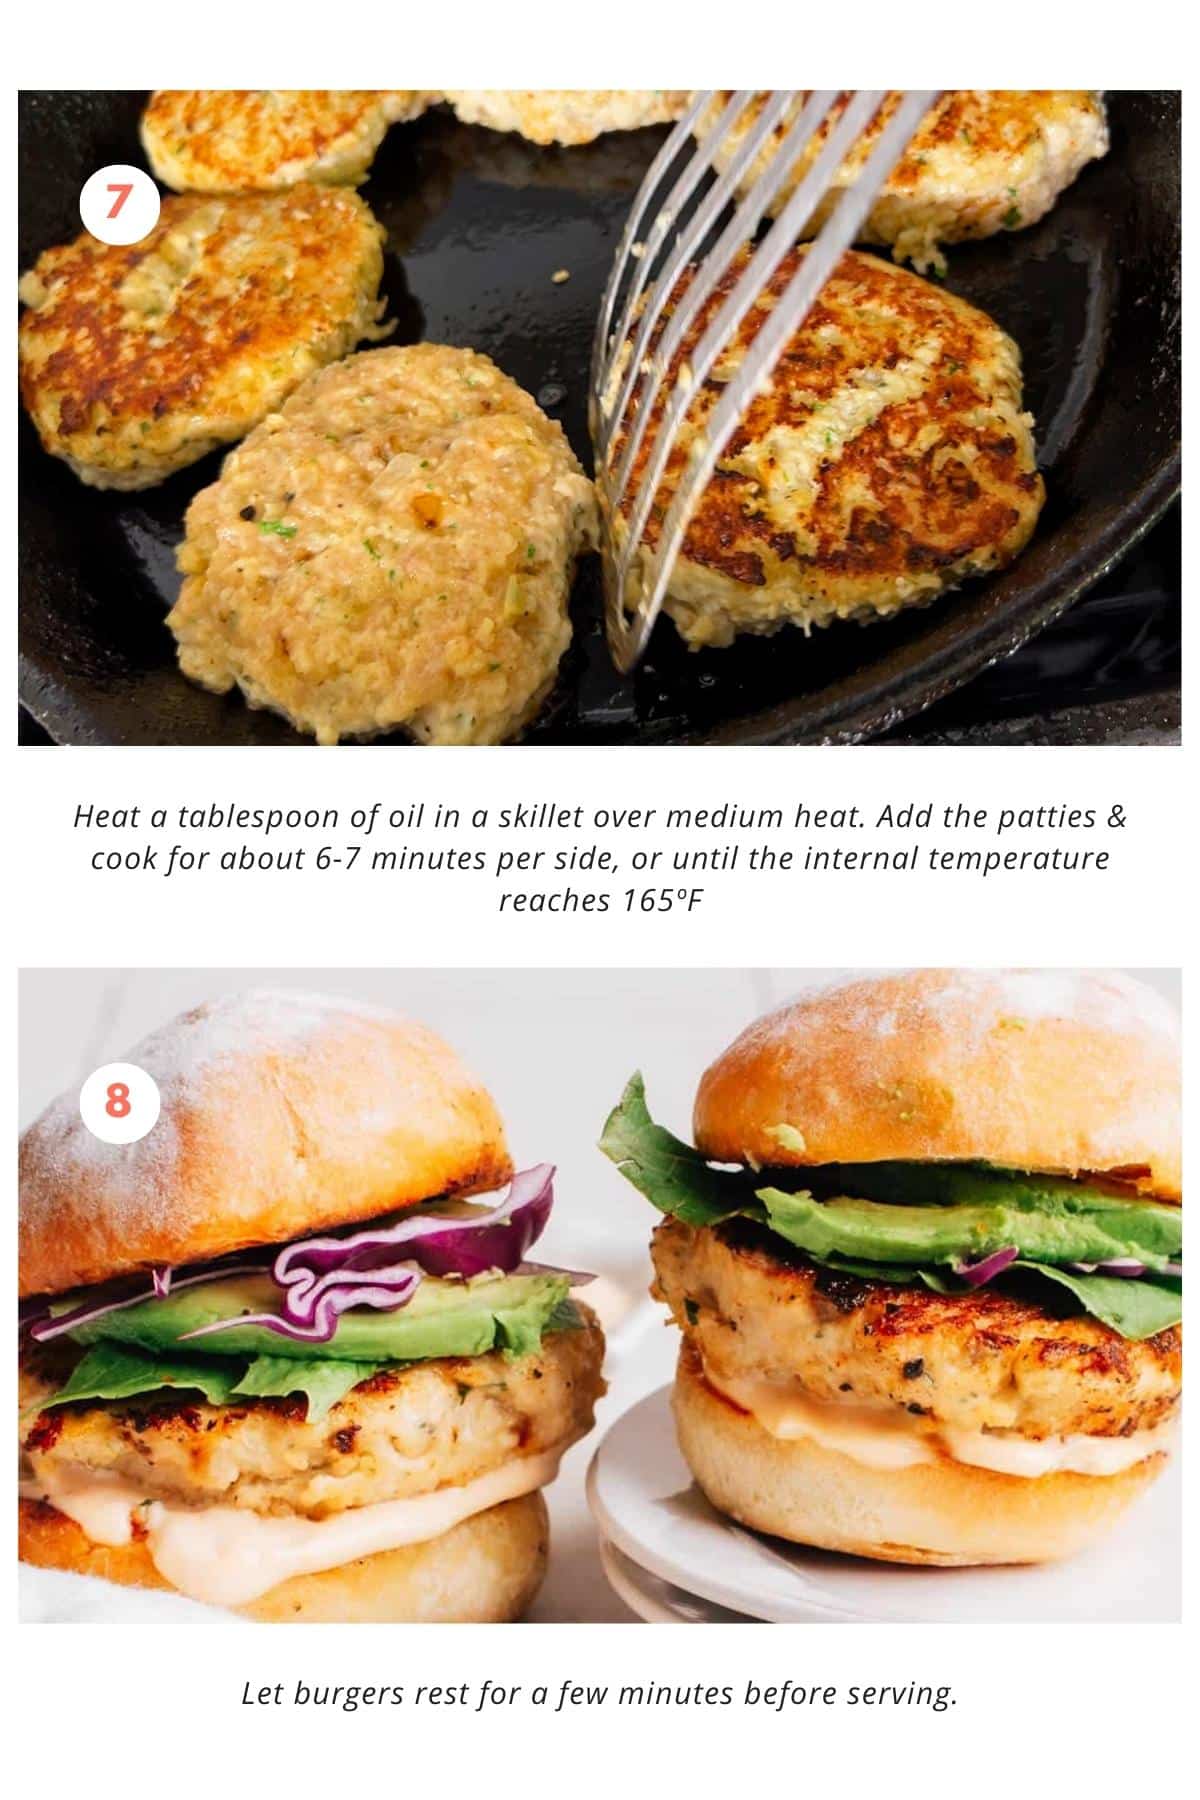 A tablespoon of oil is heated in a skillet over medium heat. The burger patties are added to the skillet and cooked for about 6-7 minutes per side, or until the internal temperature reaches 165ºF.